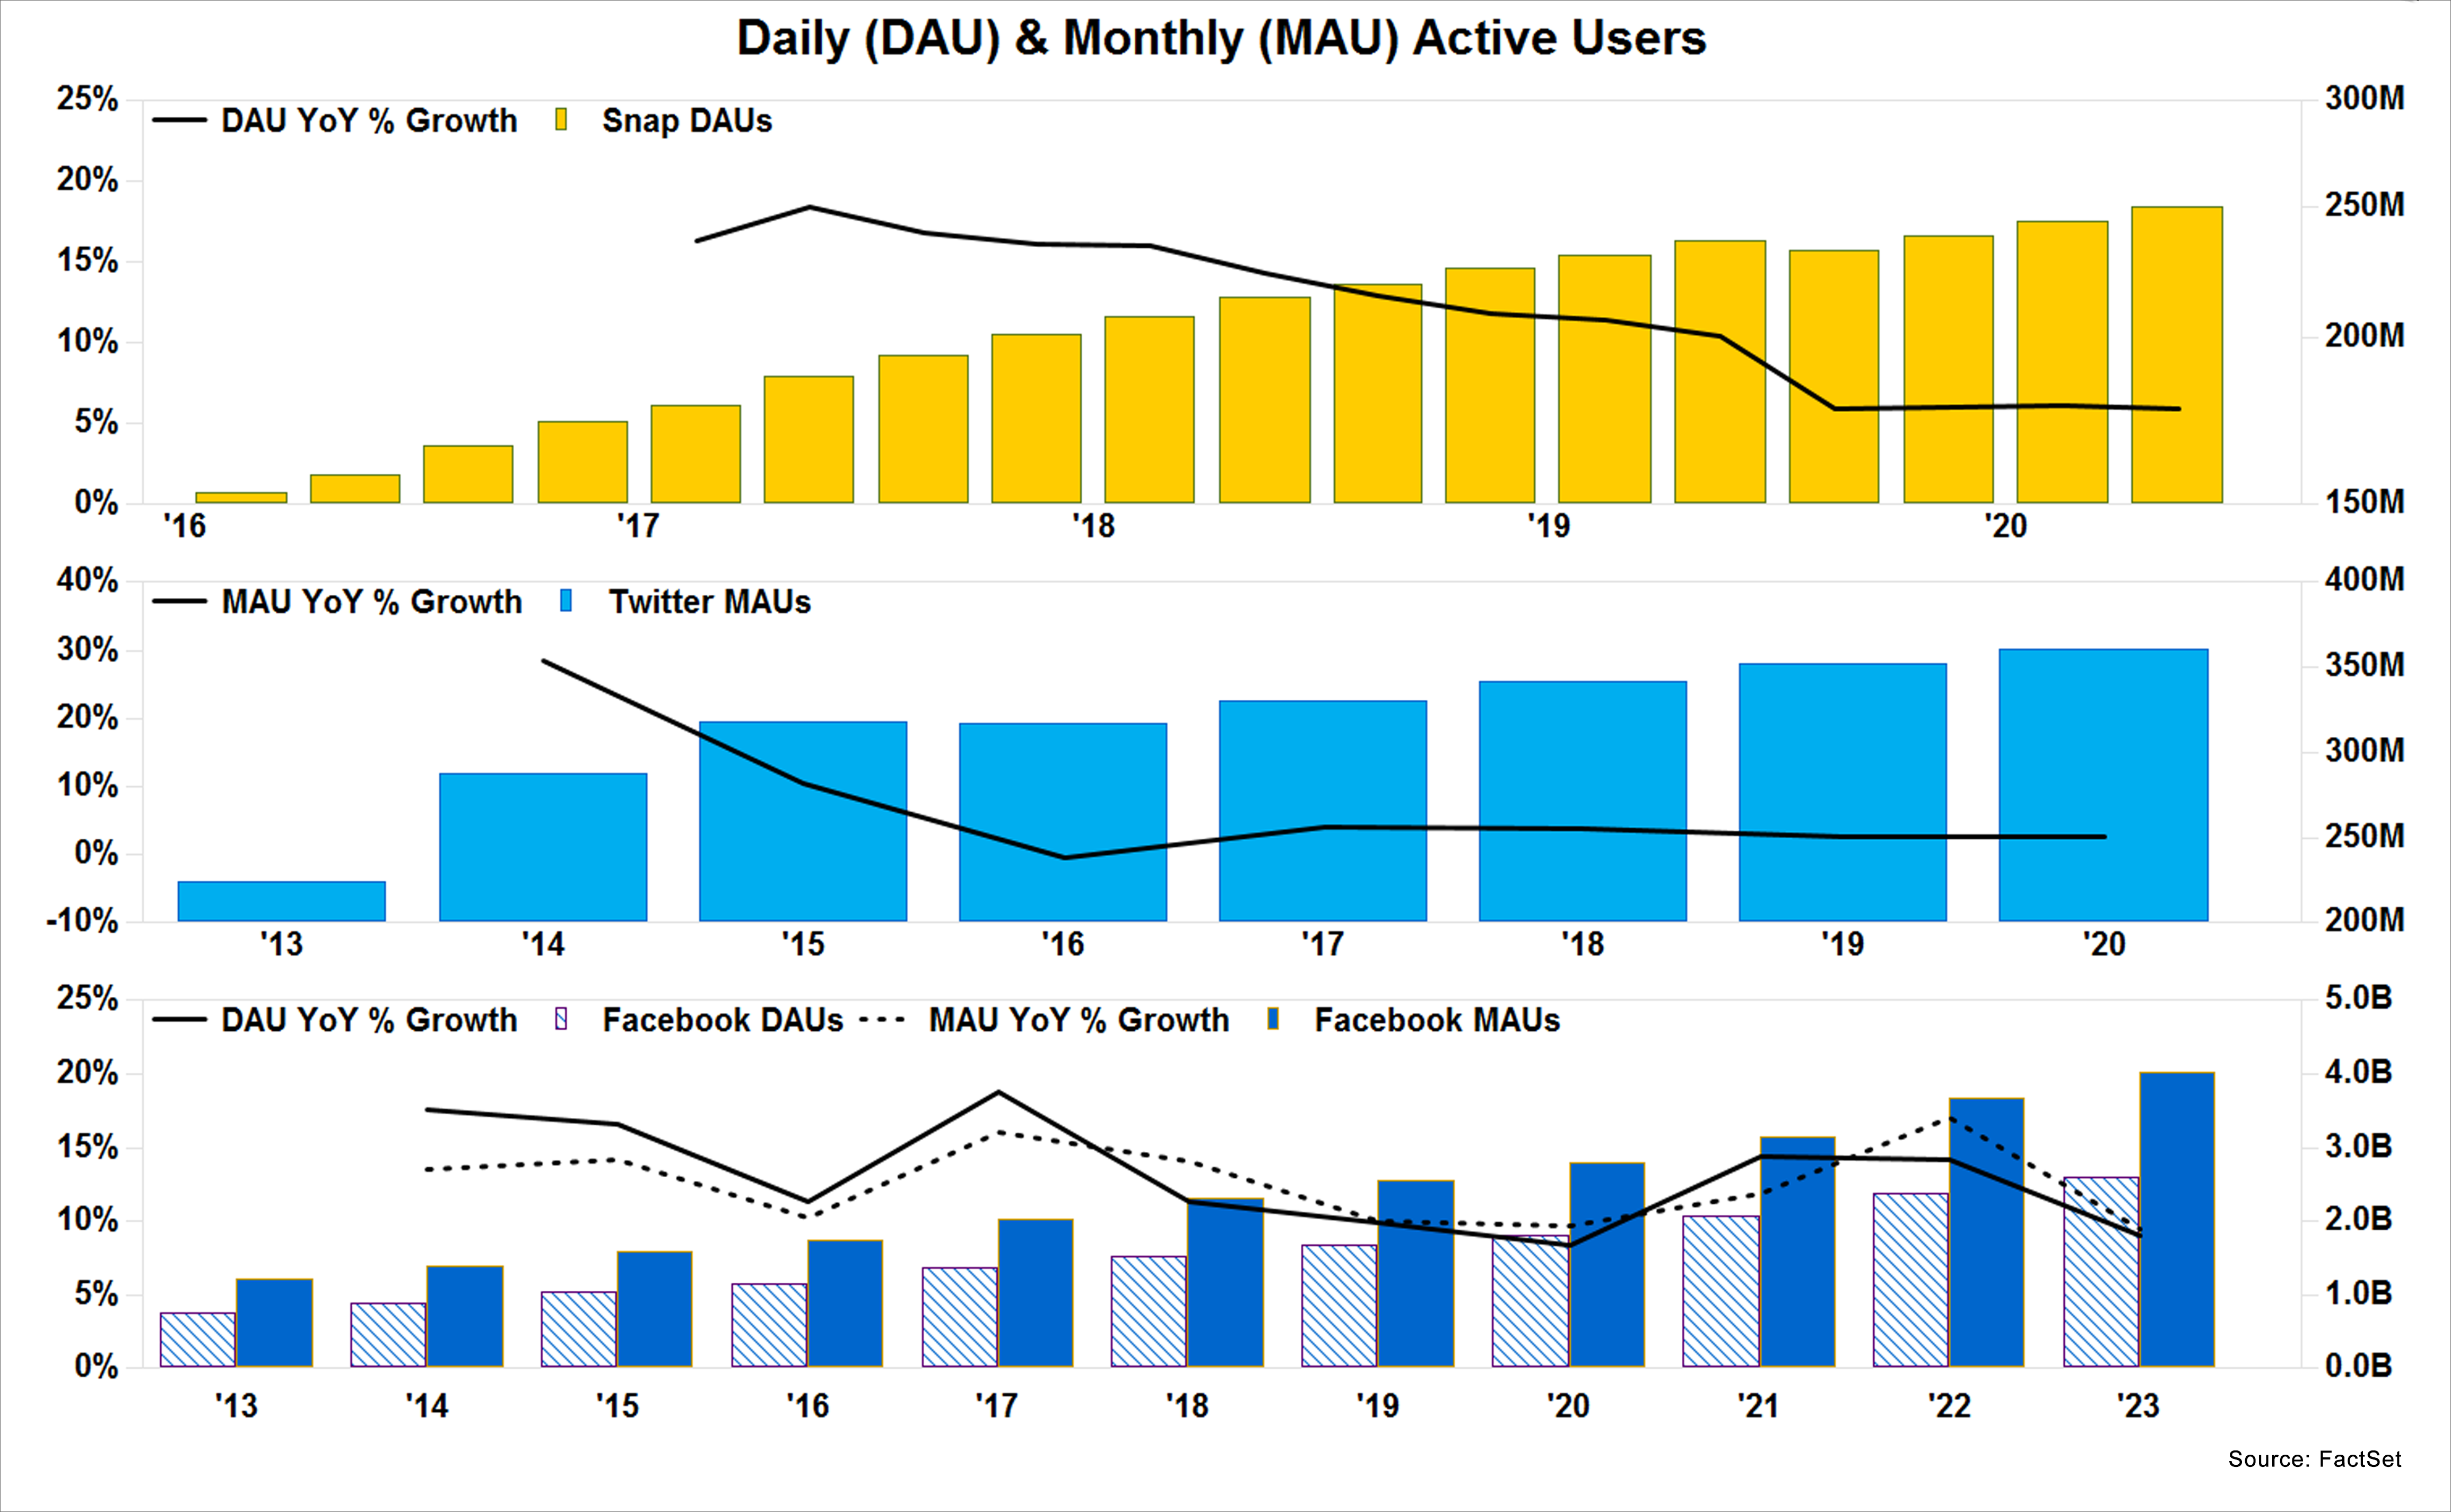 Daily DAU and Monthly MAU Active Users